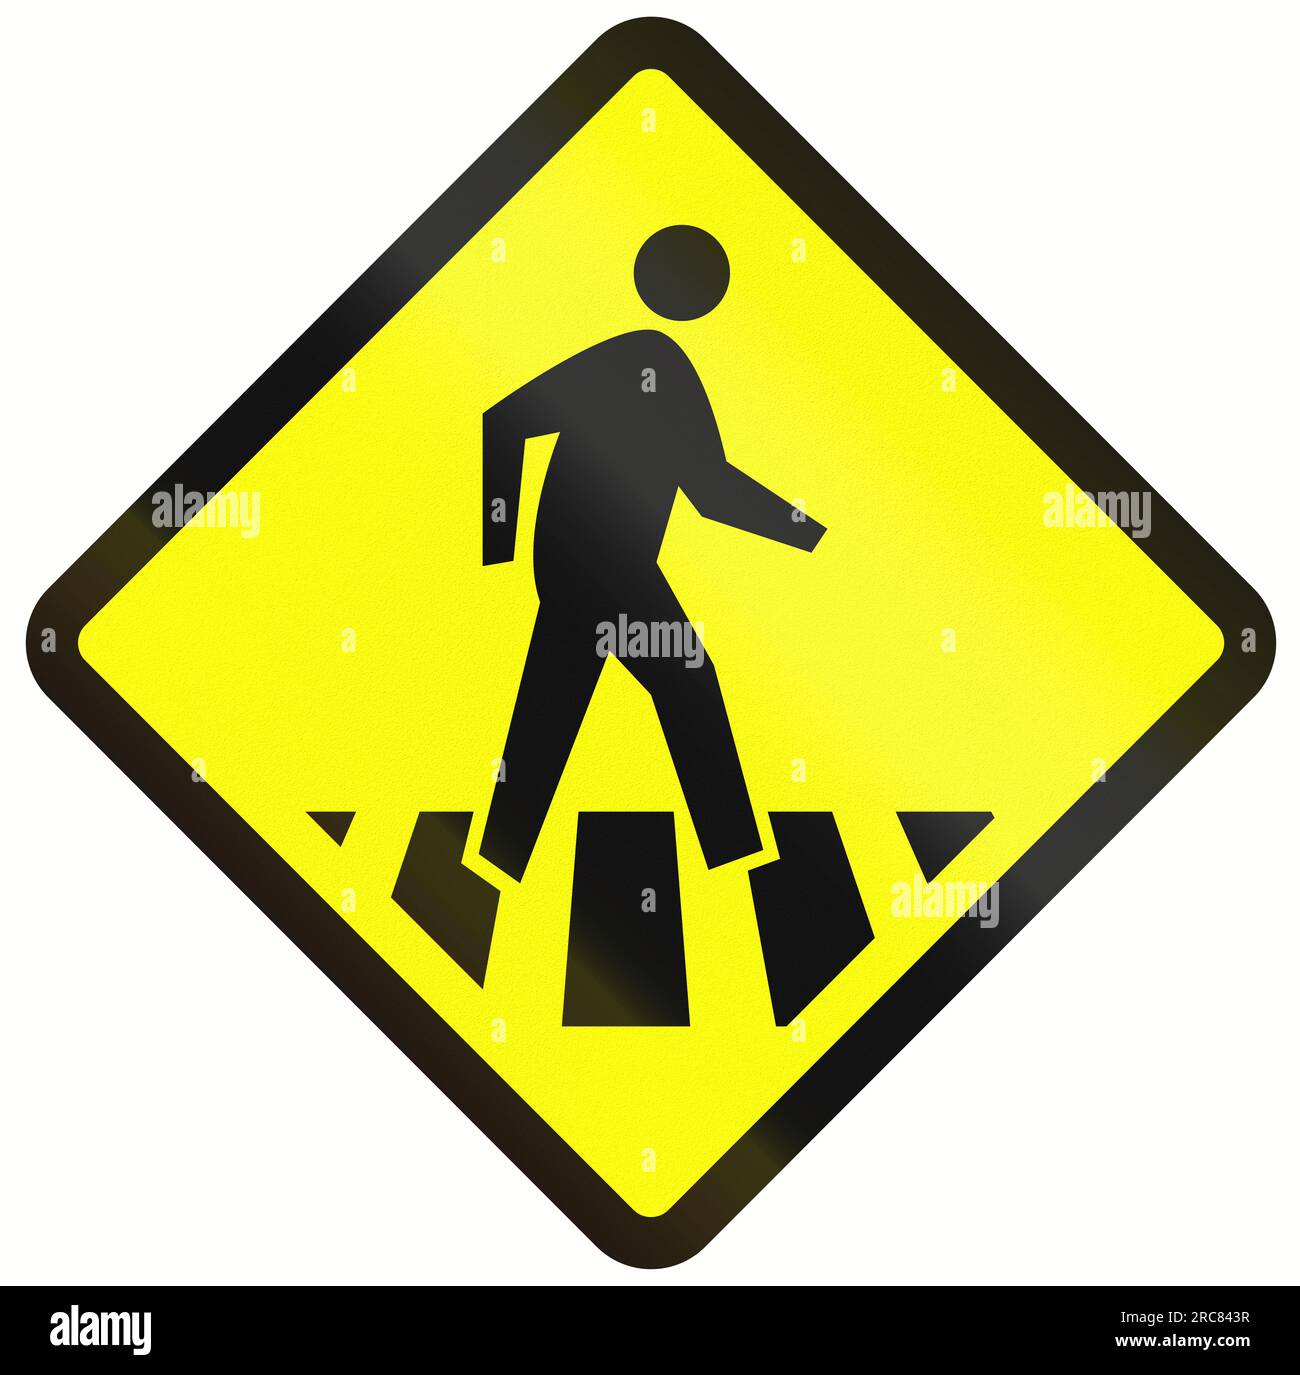 Indonesian road warning sign - Pedestrian crossing Stock Photo